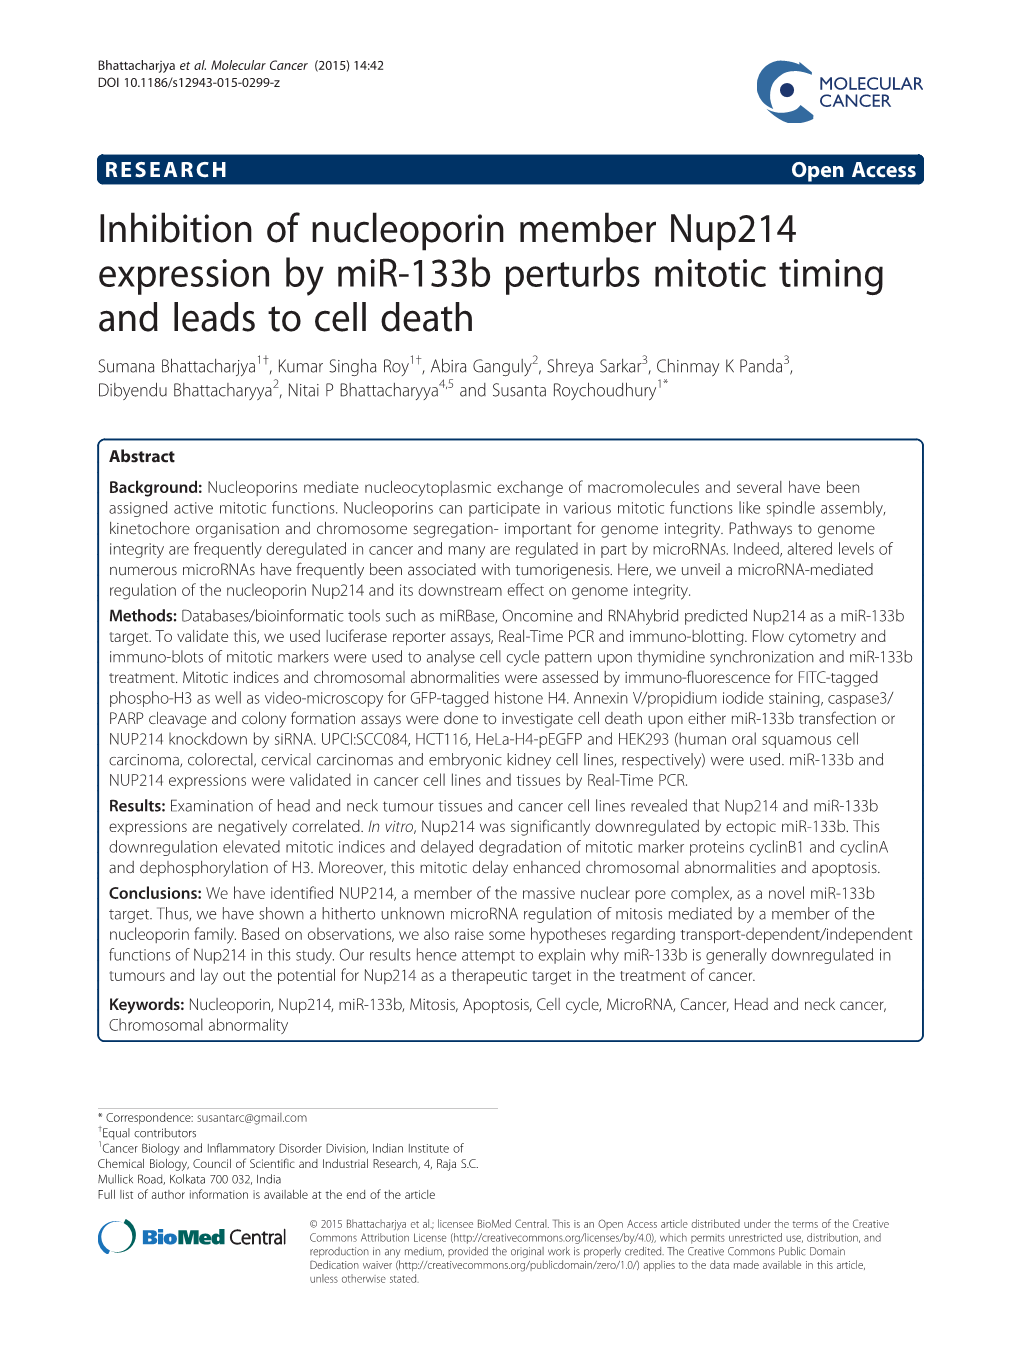 Inhibition of Nucleoporin Member Nup214 Expression by Mir-133B